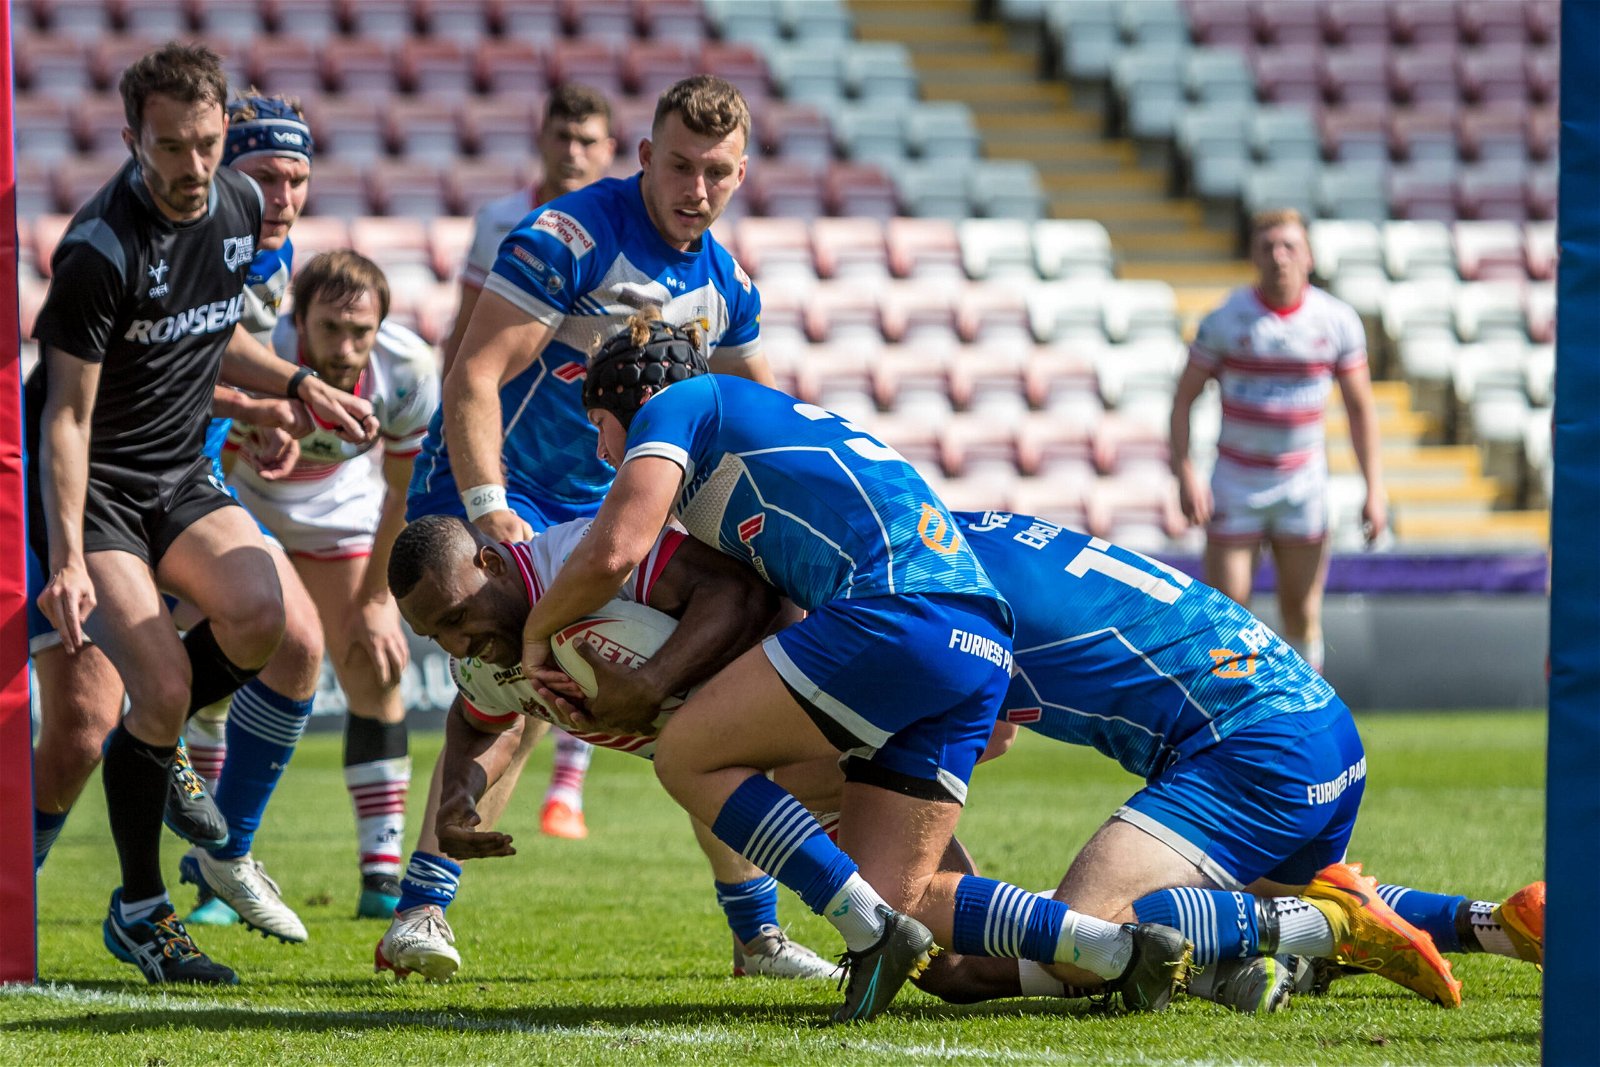 Championship Club Release Statement After Friendly Abandoned 53 Minutes Serious About Rugby League